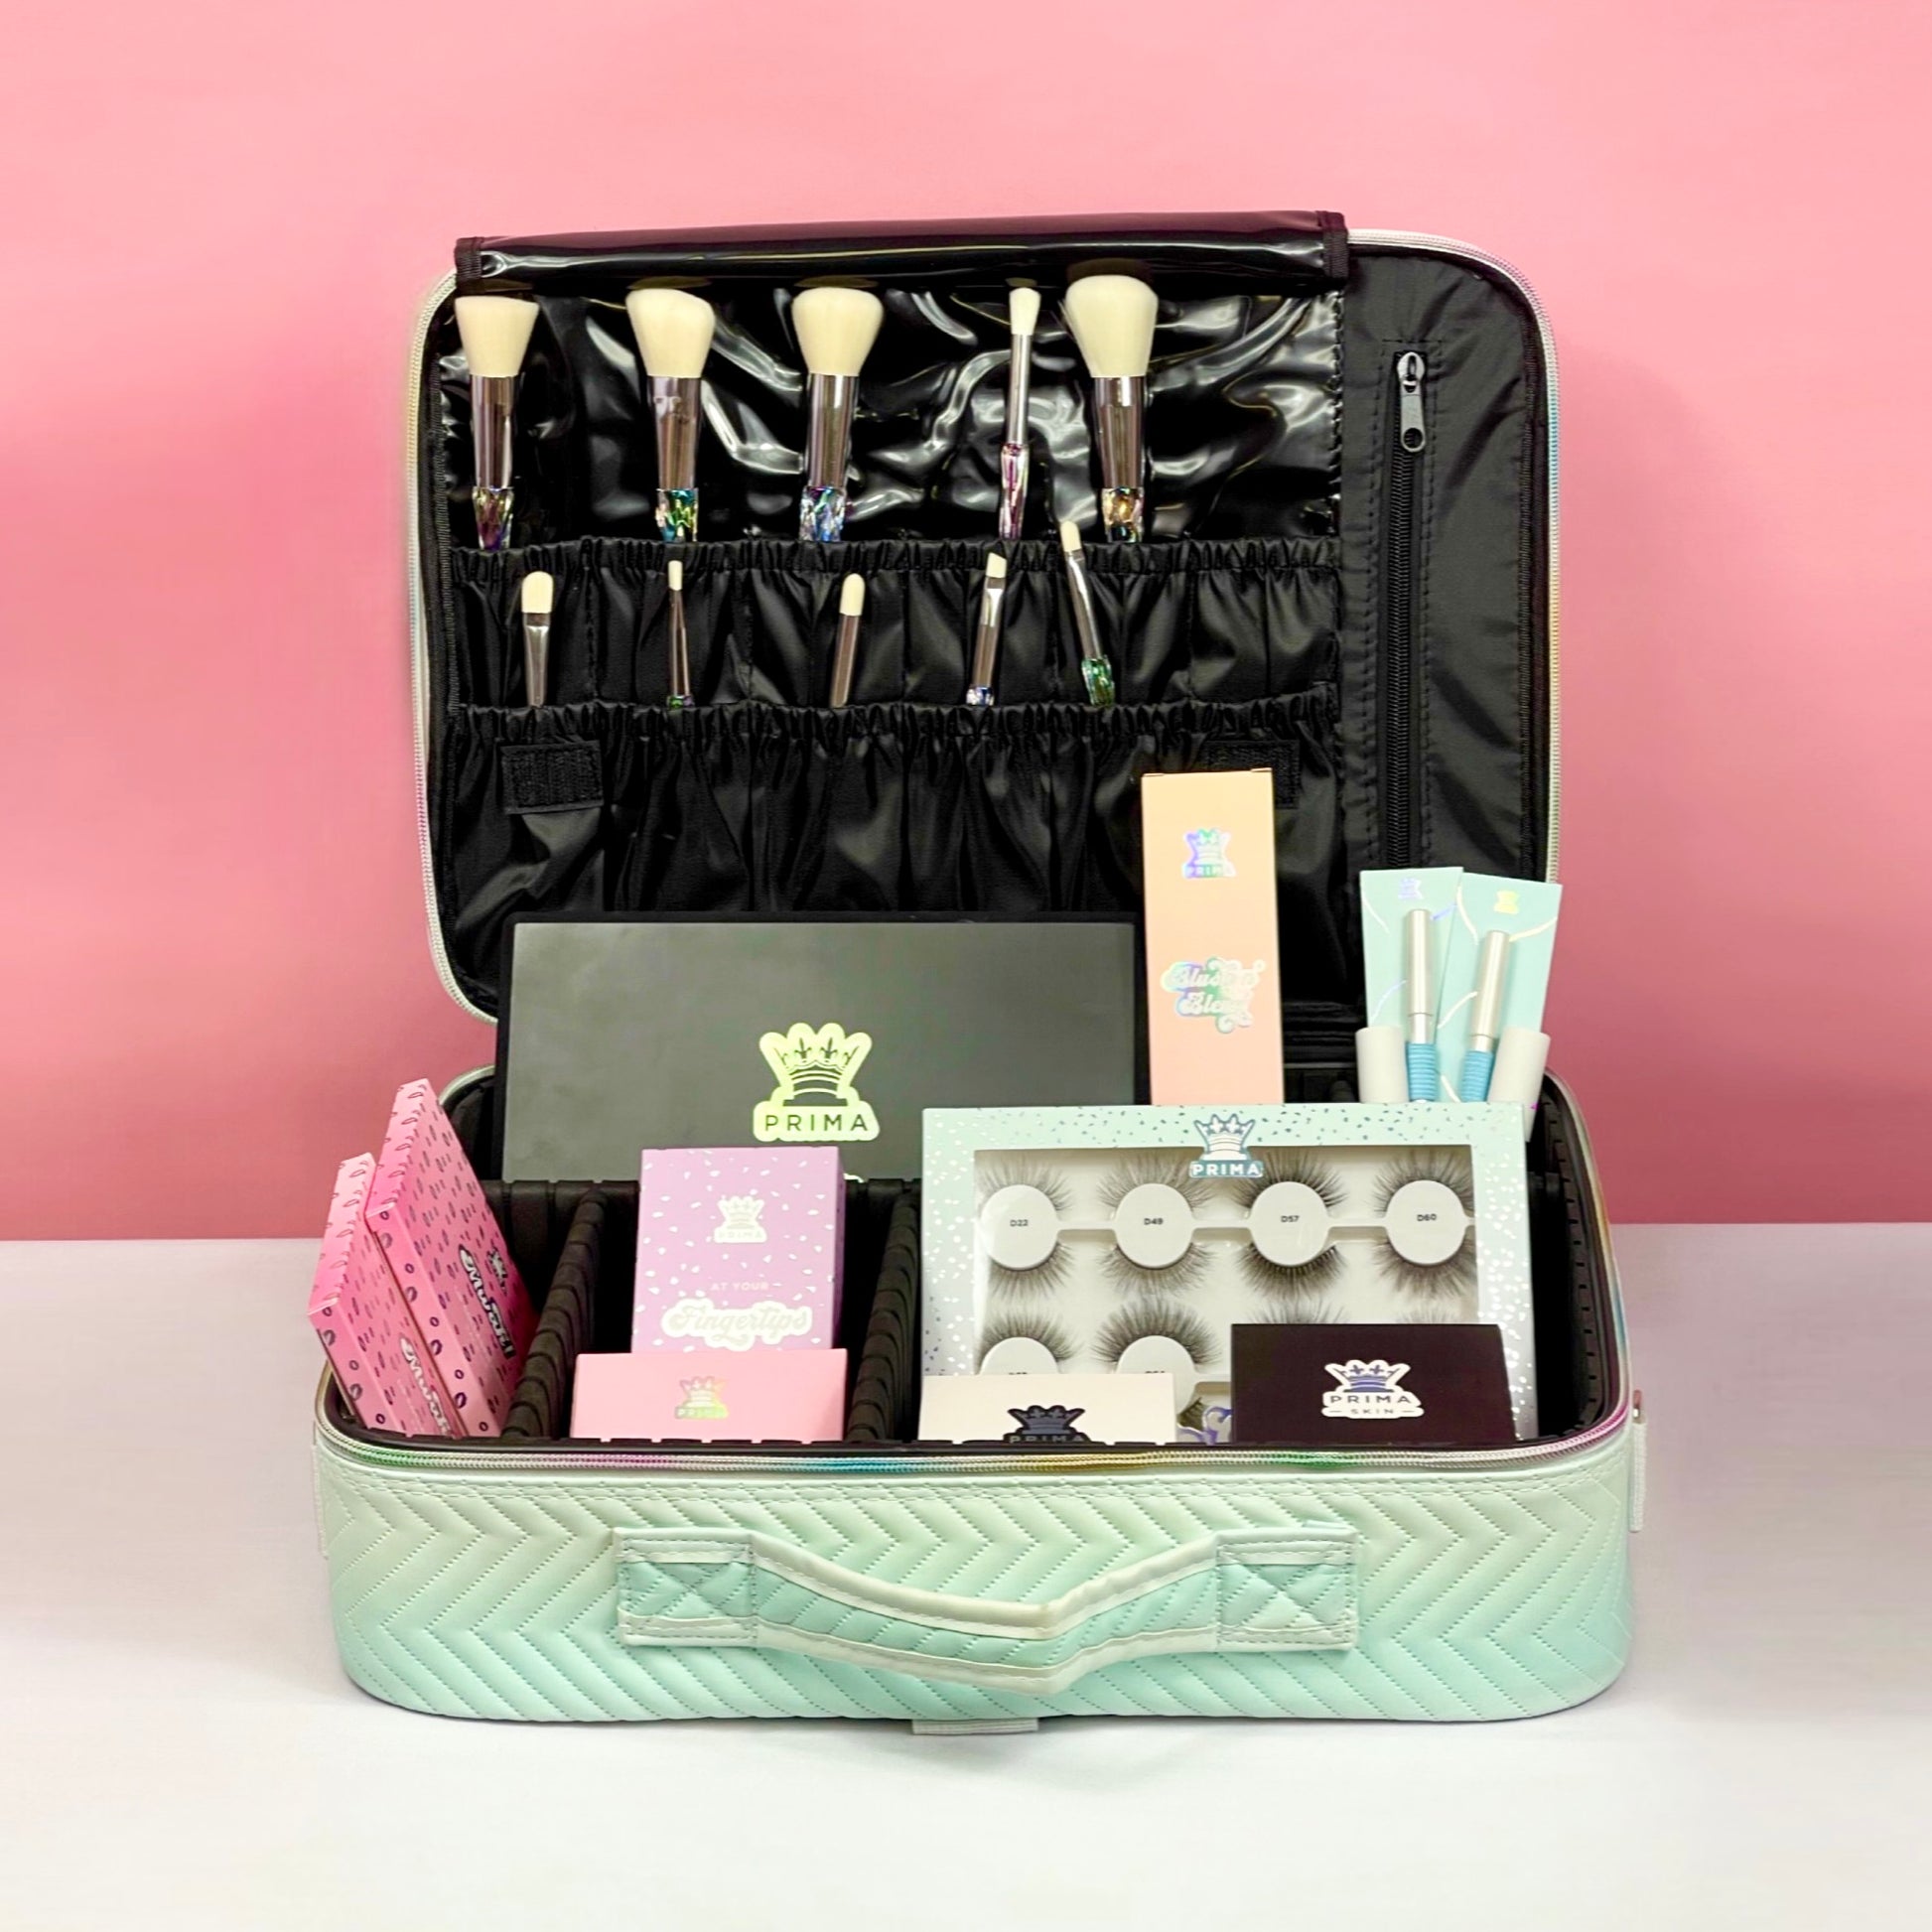 make up case stocked with lashes and makeup